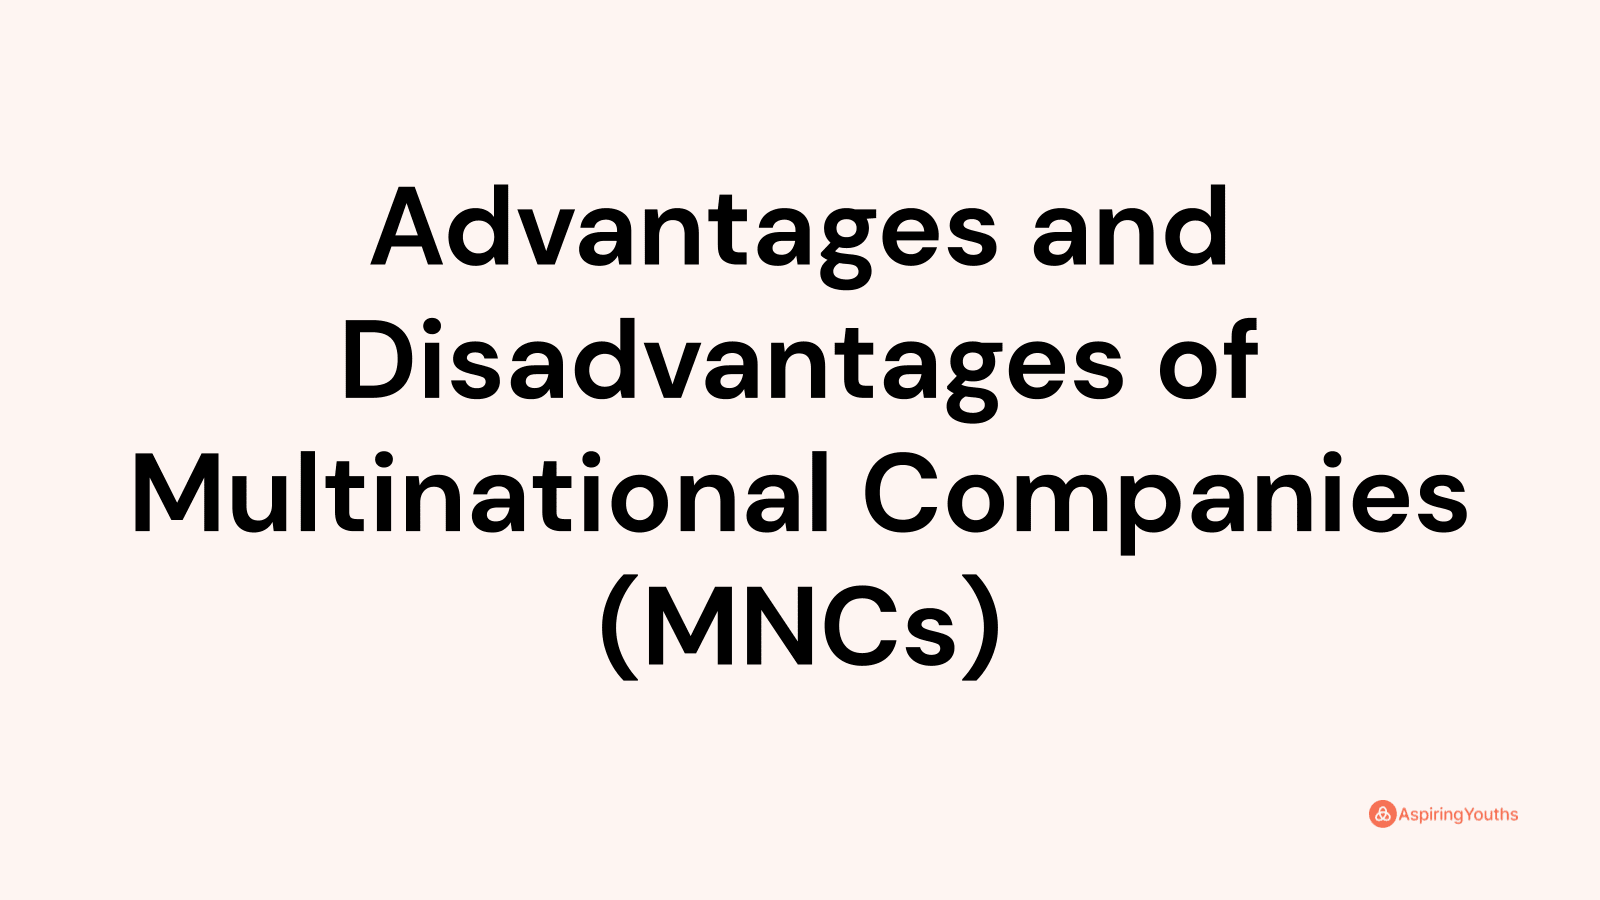 Advantages and disadvantages of Multinational Companies (MNCs)